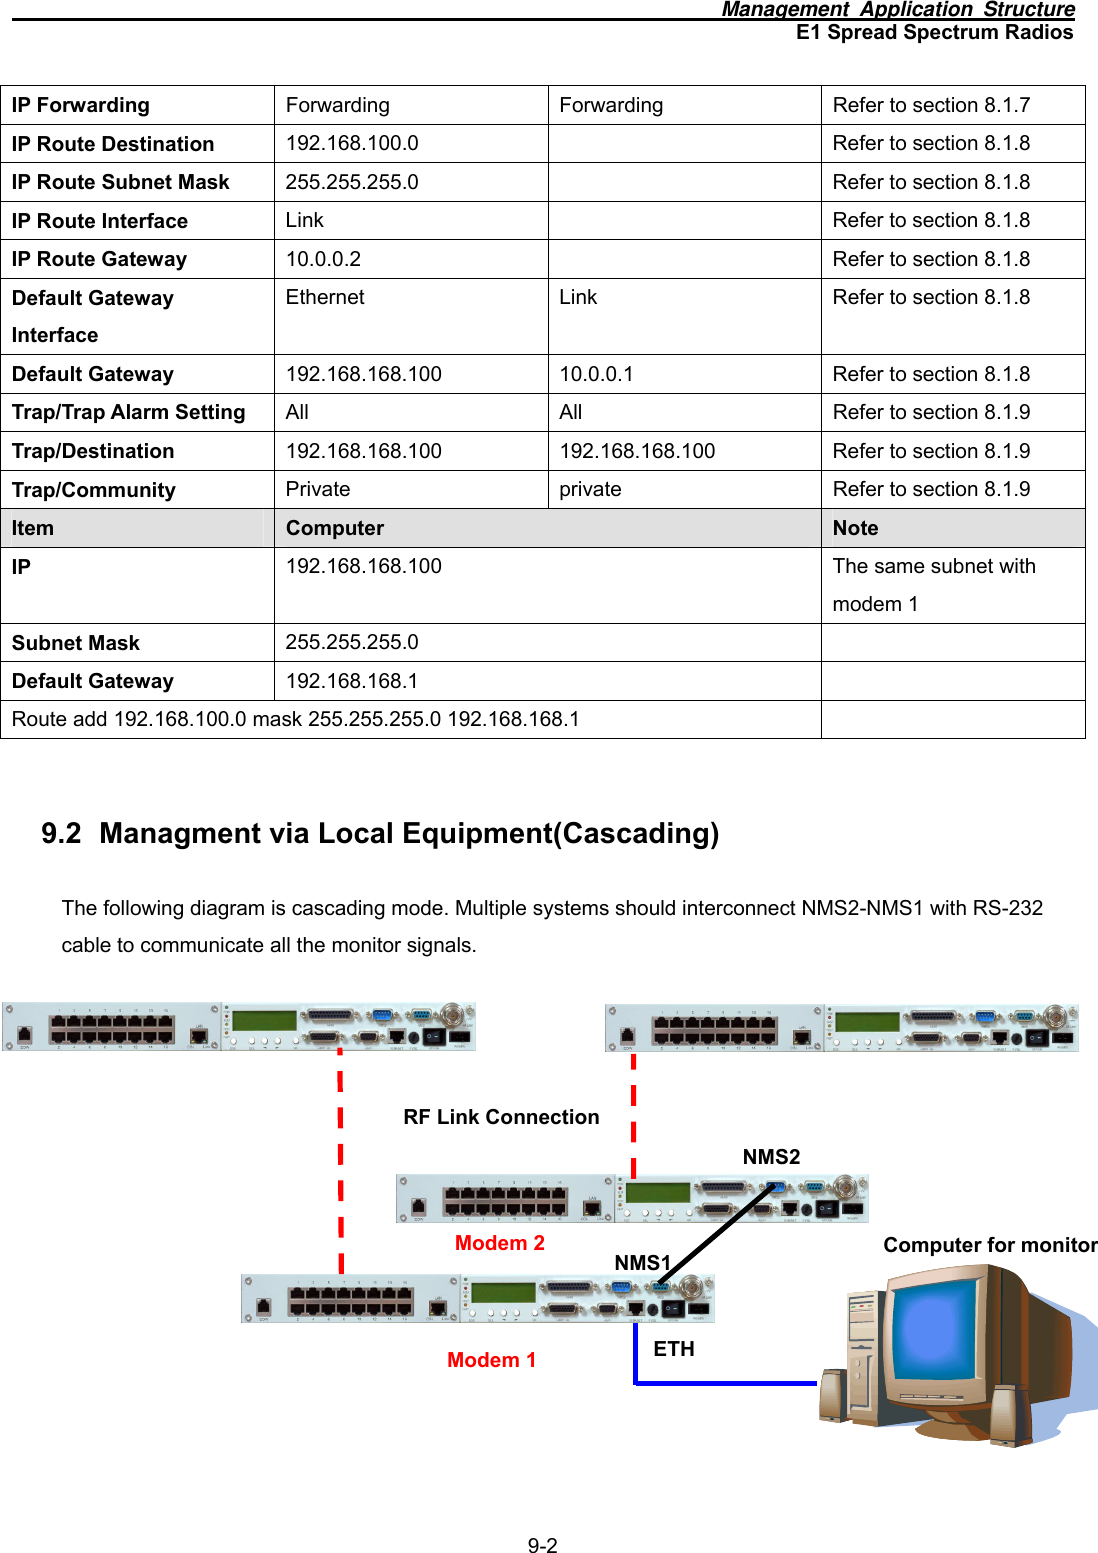                                                                     Management Application Structure E1 Spread Spectrum Radios 9-2 IP Forwarding  Forwarding  Forwarding  Refer to section 8.1.7 IP Route Destination  192.168.100.0    Refer to section 8.1.8 IP Route Subnet Mask  255.255.255.0    Refer to section 8.1.8 IP Route Interface  Link    Refer to section 8.1.8 IP Route Gateway  10.0.0.2    Refer to section 8.1.8 Default Gateway Interface Ethernet  Link  Refer to section 8.1.8 Default Gateway  192.168.168.100 10.0.0.1  Refer to section 8.1.8 Trap/Trap Alarm Setting  All  All  Refer to section 8.1.9 Trap/Destination  192.168.168.100 192.168.168.100 Refer to section 8.1.9 Trap/Community  Private  private  Refer to section 8.1.9 Item  Computer  Note IP  192.168.168.100  The same subnet with modem 1 Subnet Mask  255.255.255.0  Default Gateway  192.168.168.1  Route add 192.168.100.0 mask 255.255.255.0 192.168.168.1    9.2  Managment via Local Equipment(Cascading) The following diagram is cascading mode. Multiple systems should interconnect NMS2-NMS1 with RS-232 cable to communicate all the monitor signals.                NMS2 NMS1ETH RF Link ConnectionComputer for monitor Modem 1Modem 2